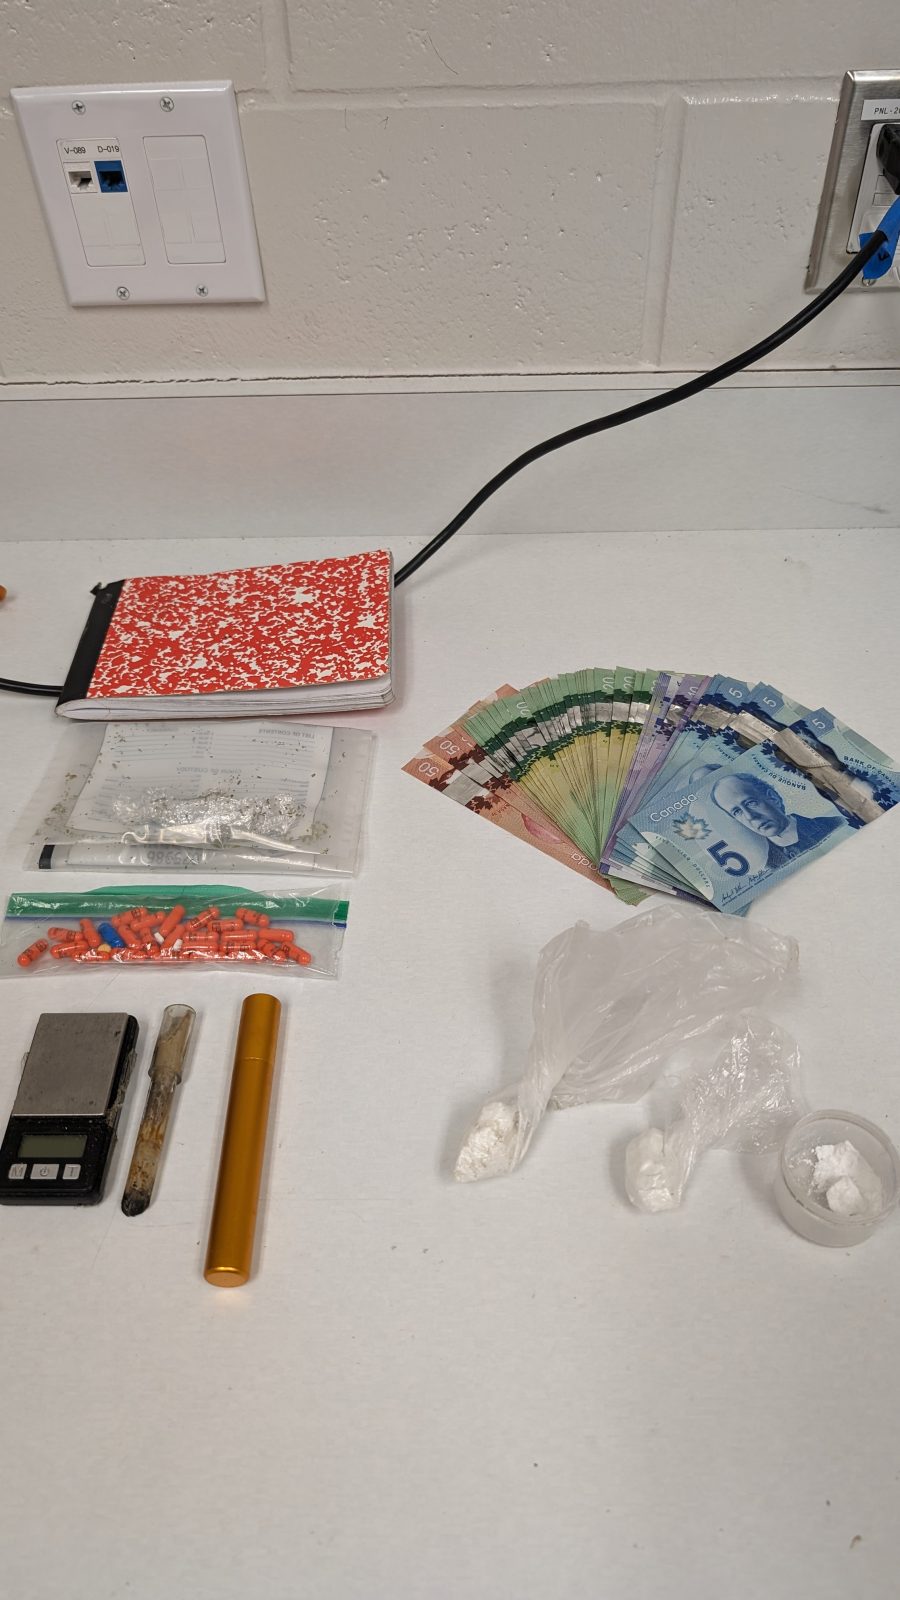 L’Orignal woman facing drug trafficking charges